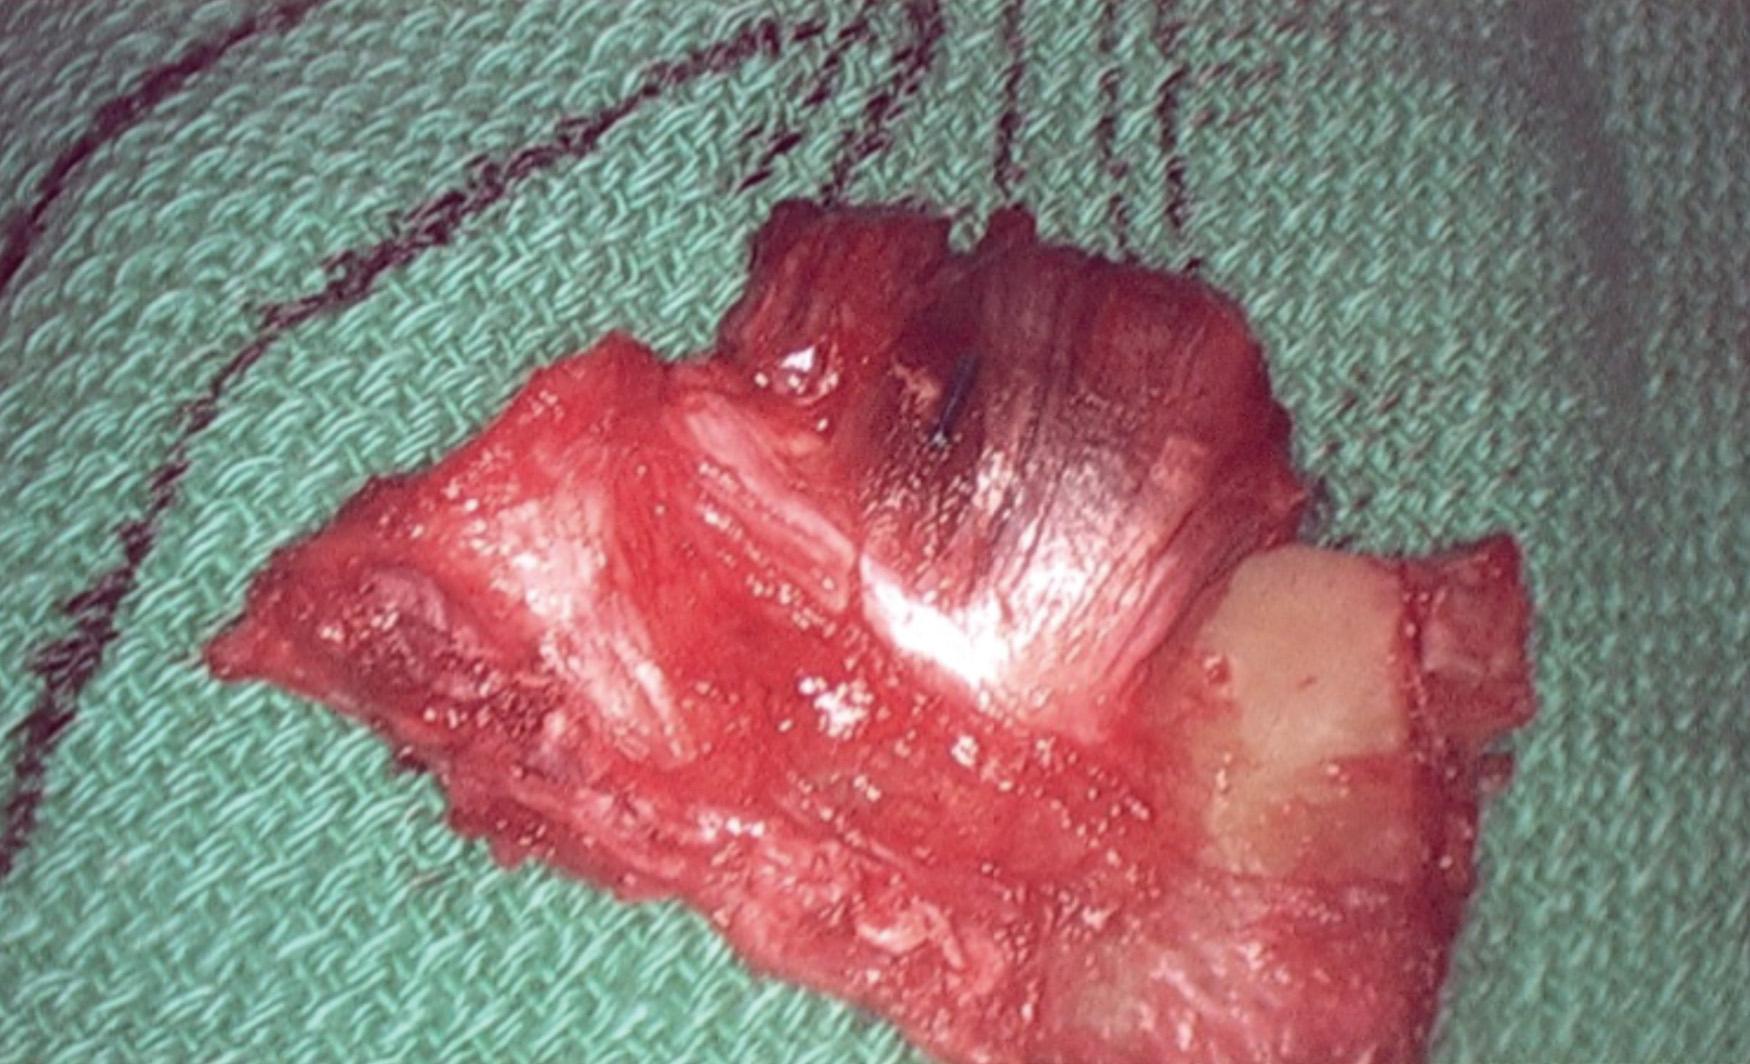 Fig. 24.11, Surgical specimen of the first rib with associated anterior scalene tendinous attachment.